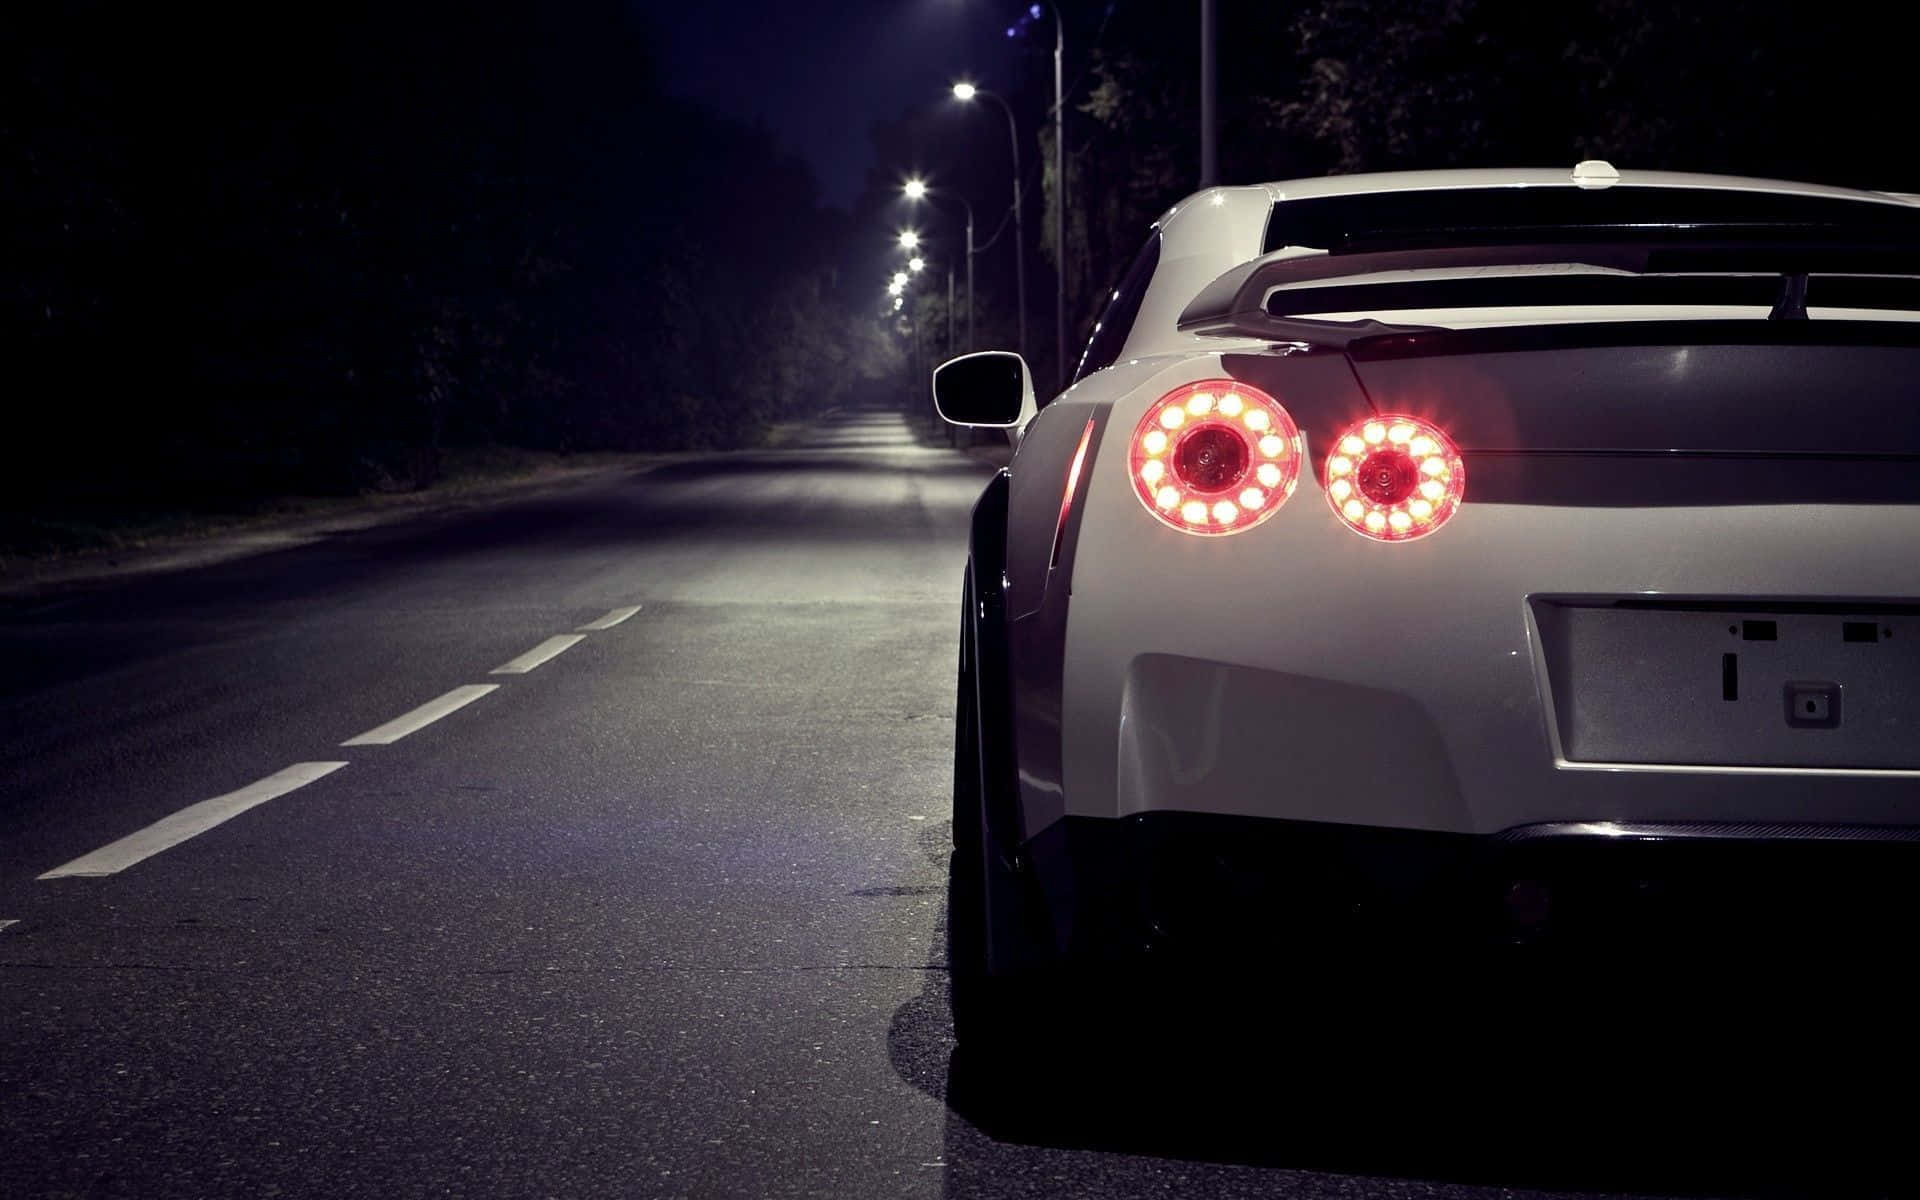 Get Cool&Stylish in the Nissan GTR Wallpaper